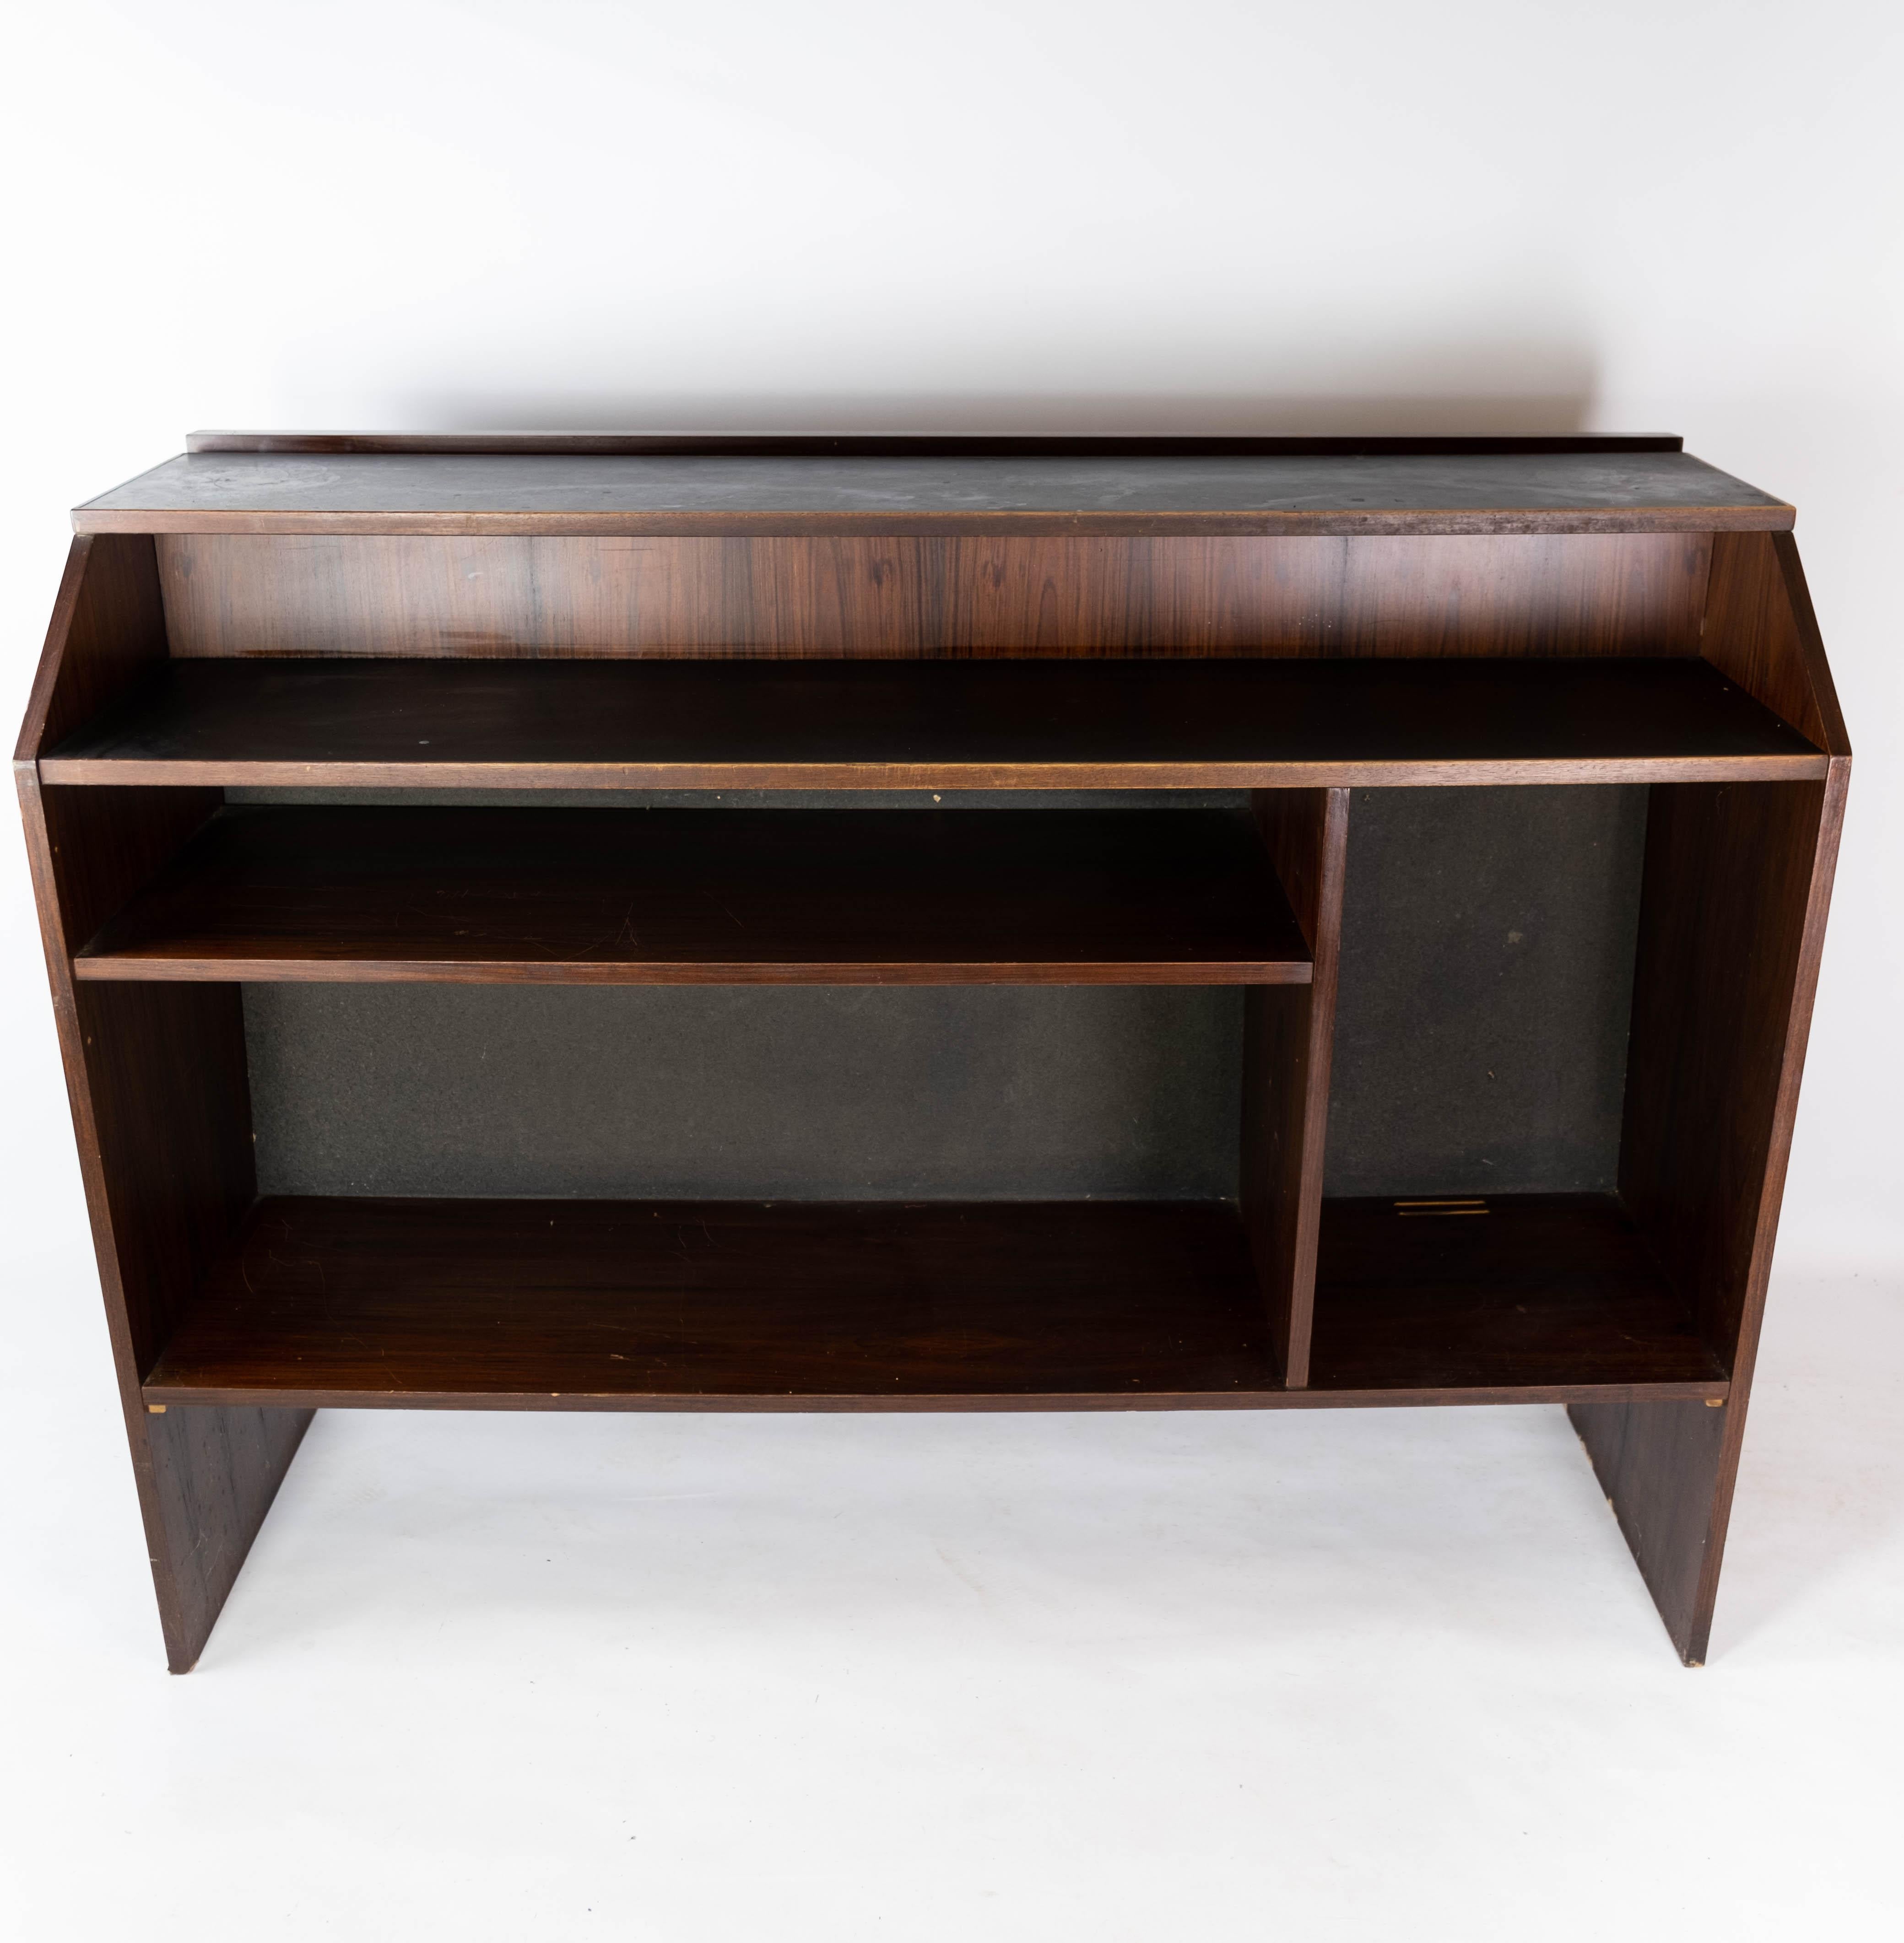 The rosewood bar, crafted in the 1960s with Danish design sensibilities, epitomizes the elegance and craftsmanship of Scandinavian Modern furniture. Its sleek lines and rich rosewood finish make it a timeless piece that adds sophistication to any